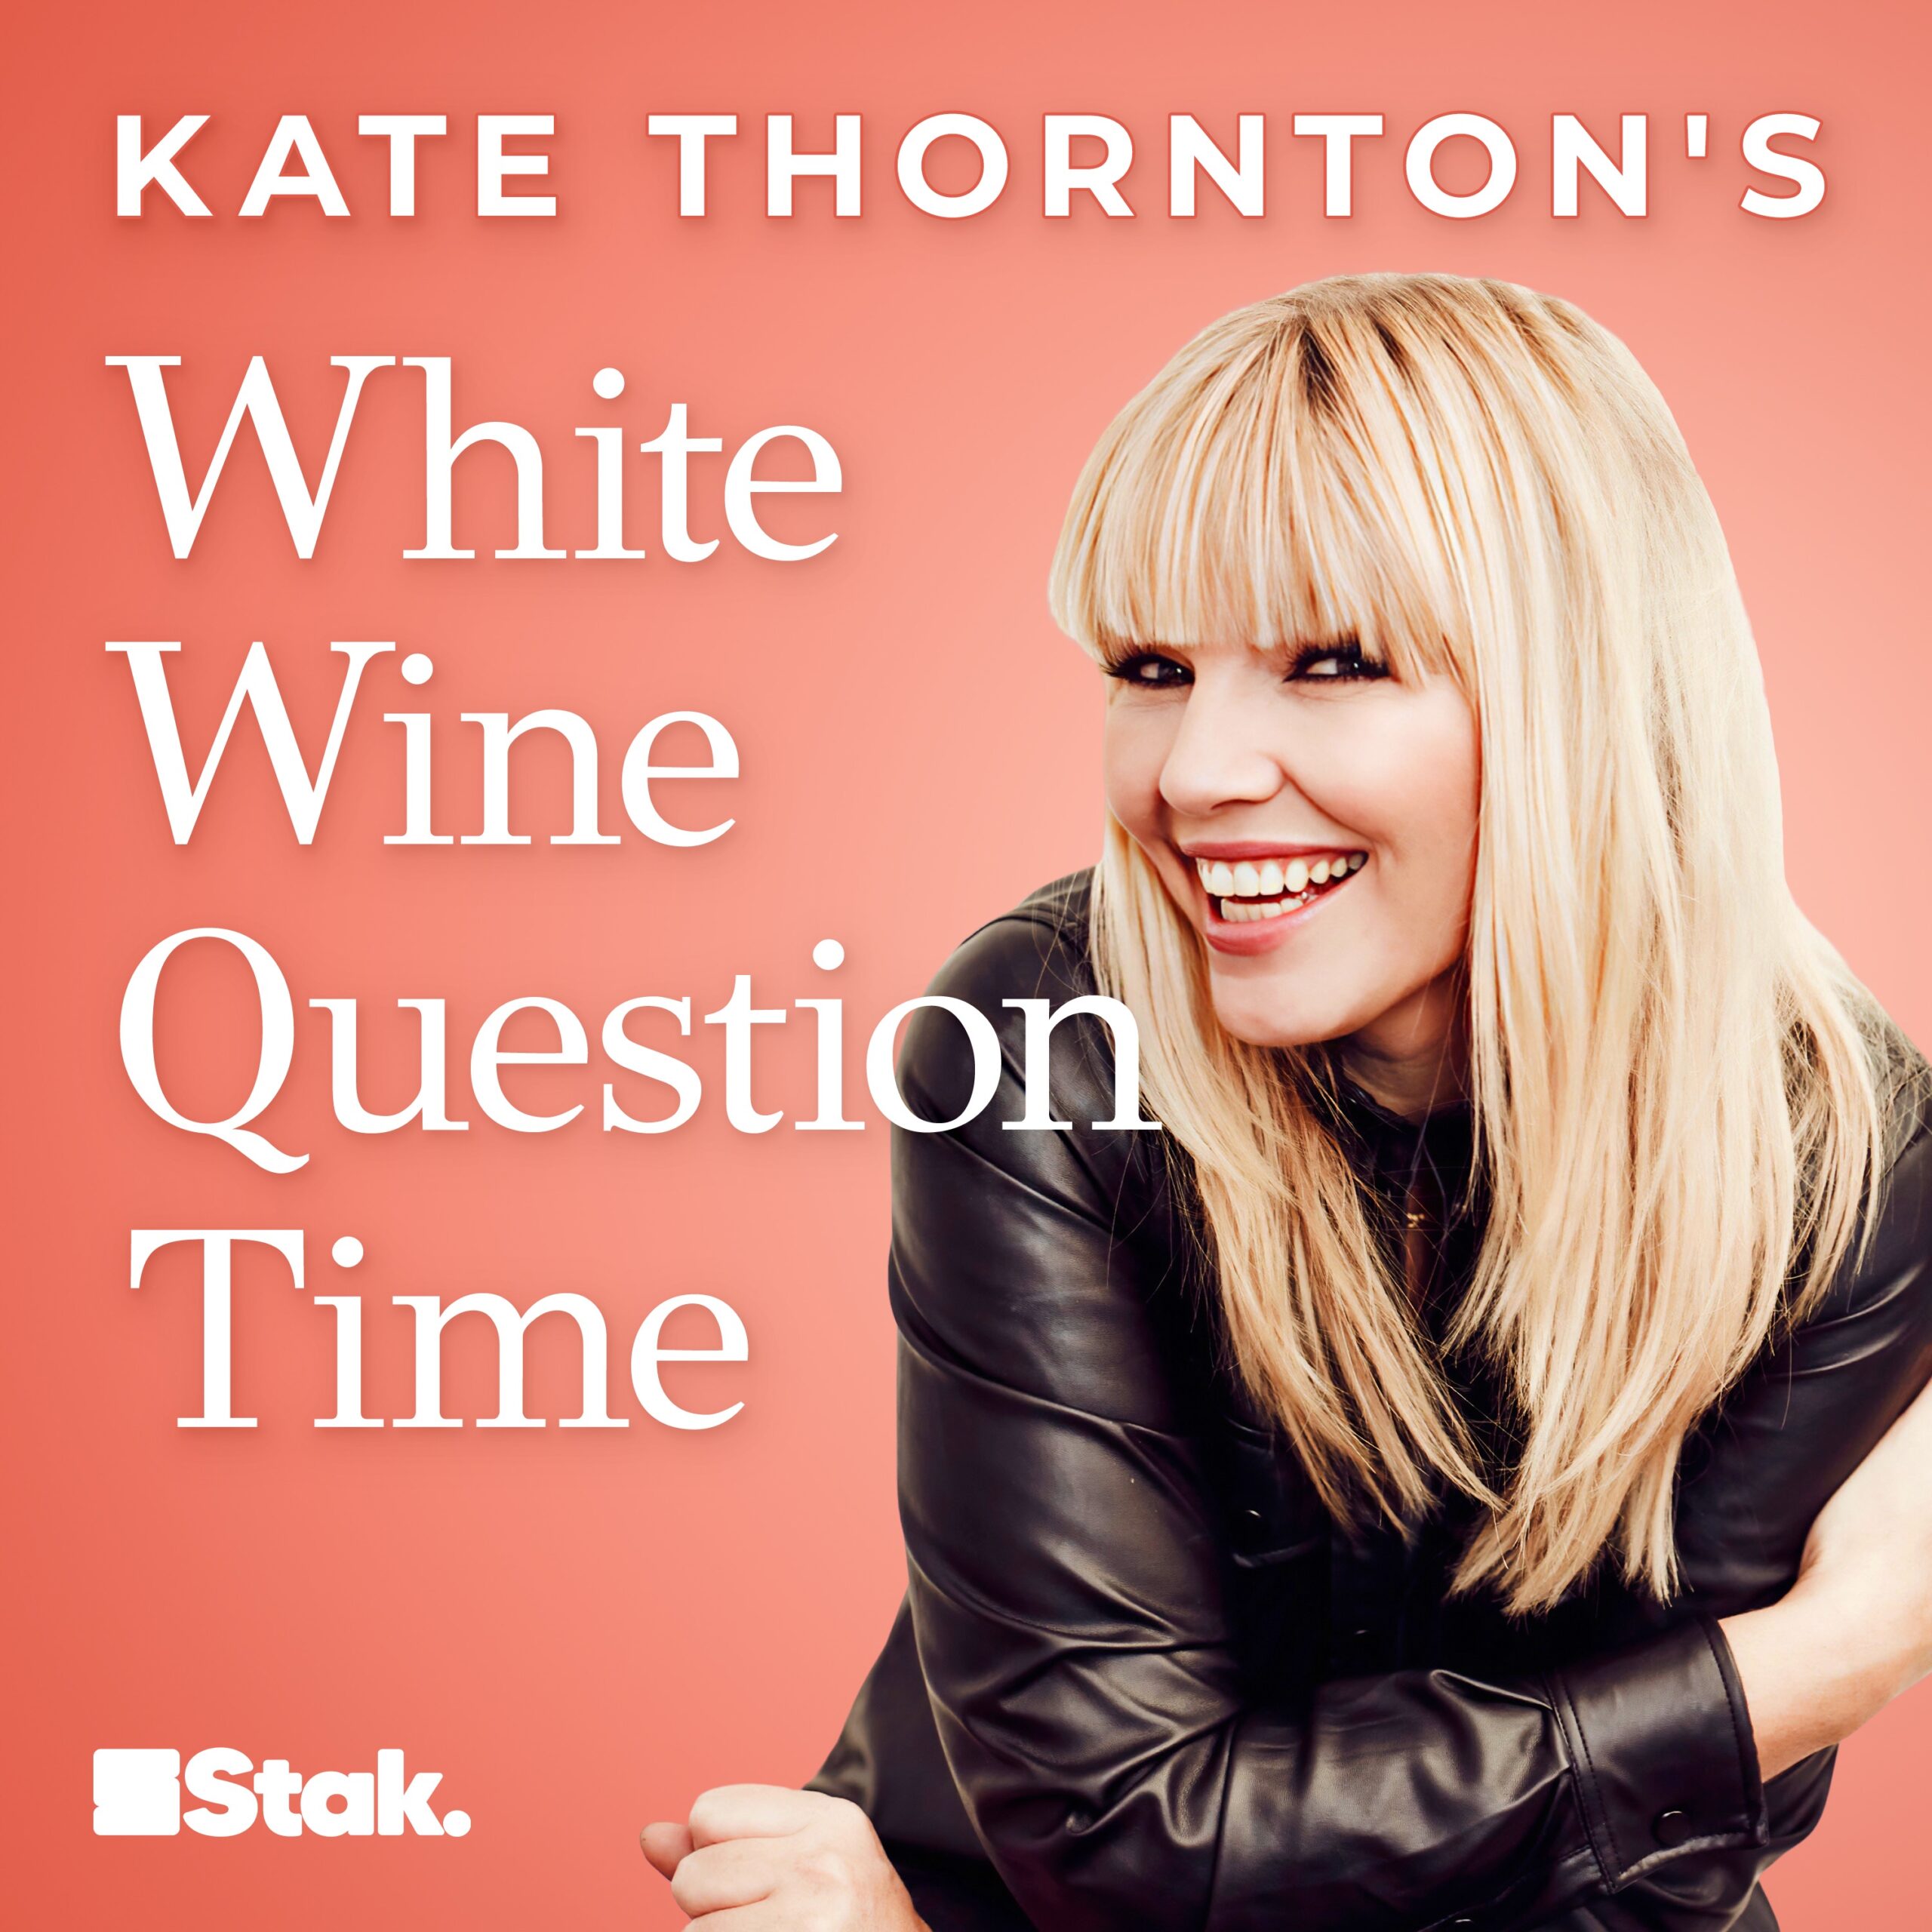 Kate Thornton’s White Wine Question Time